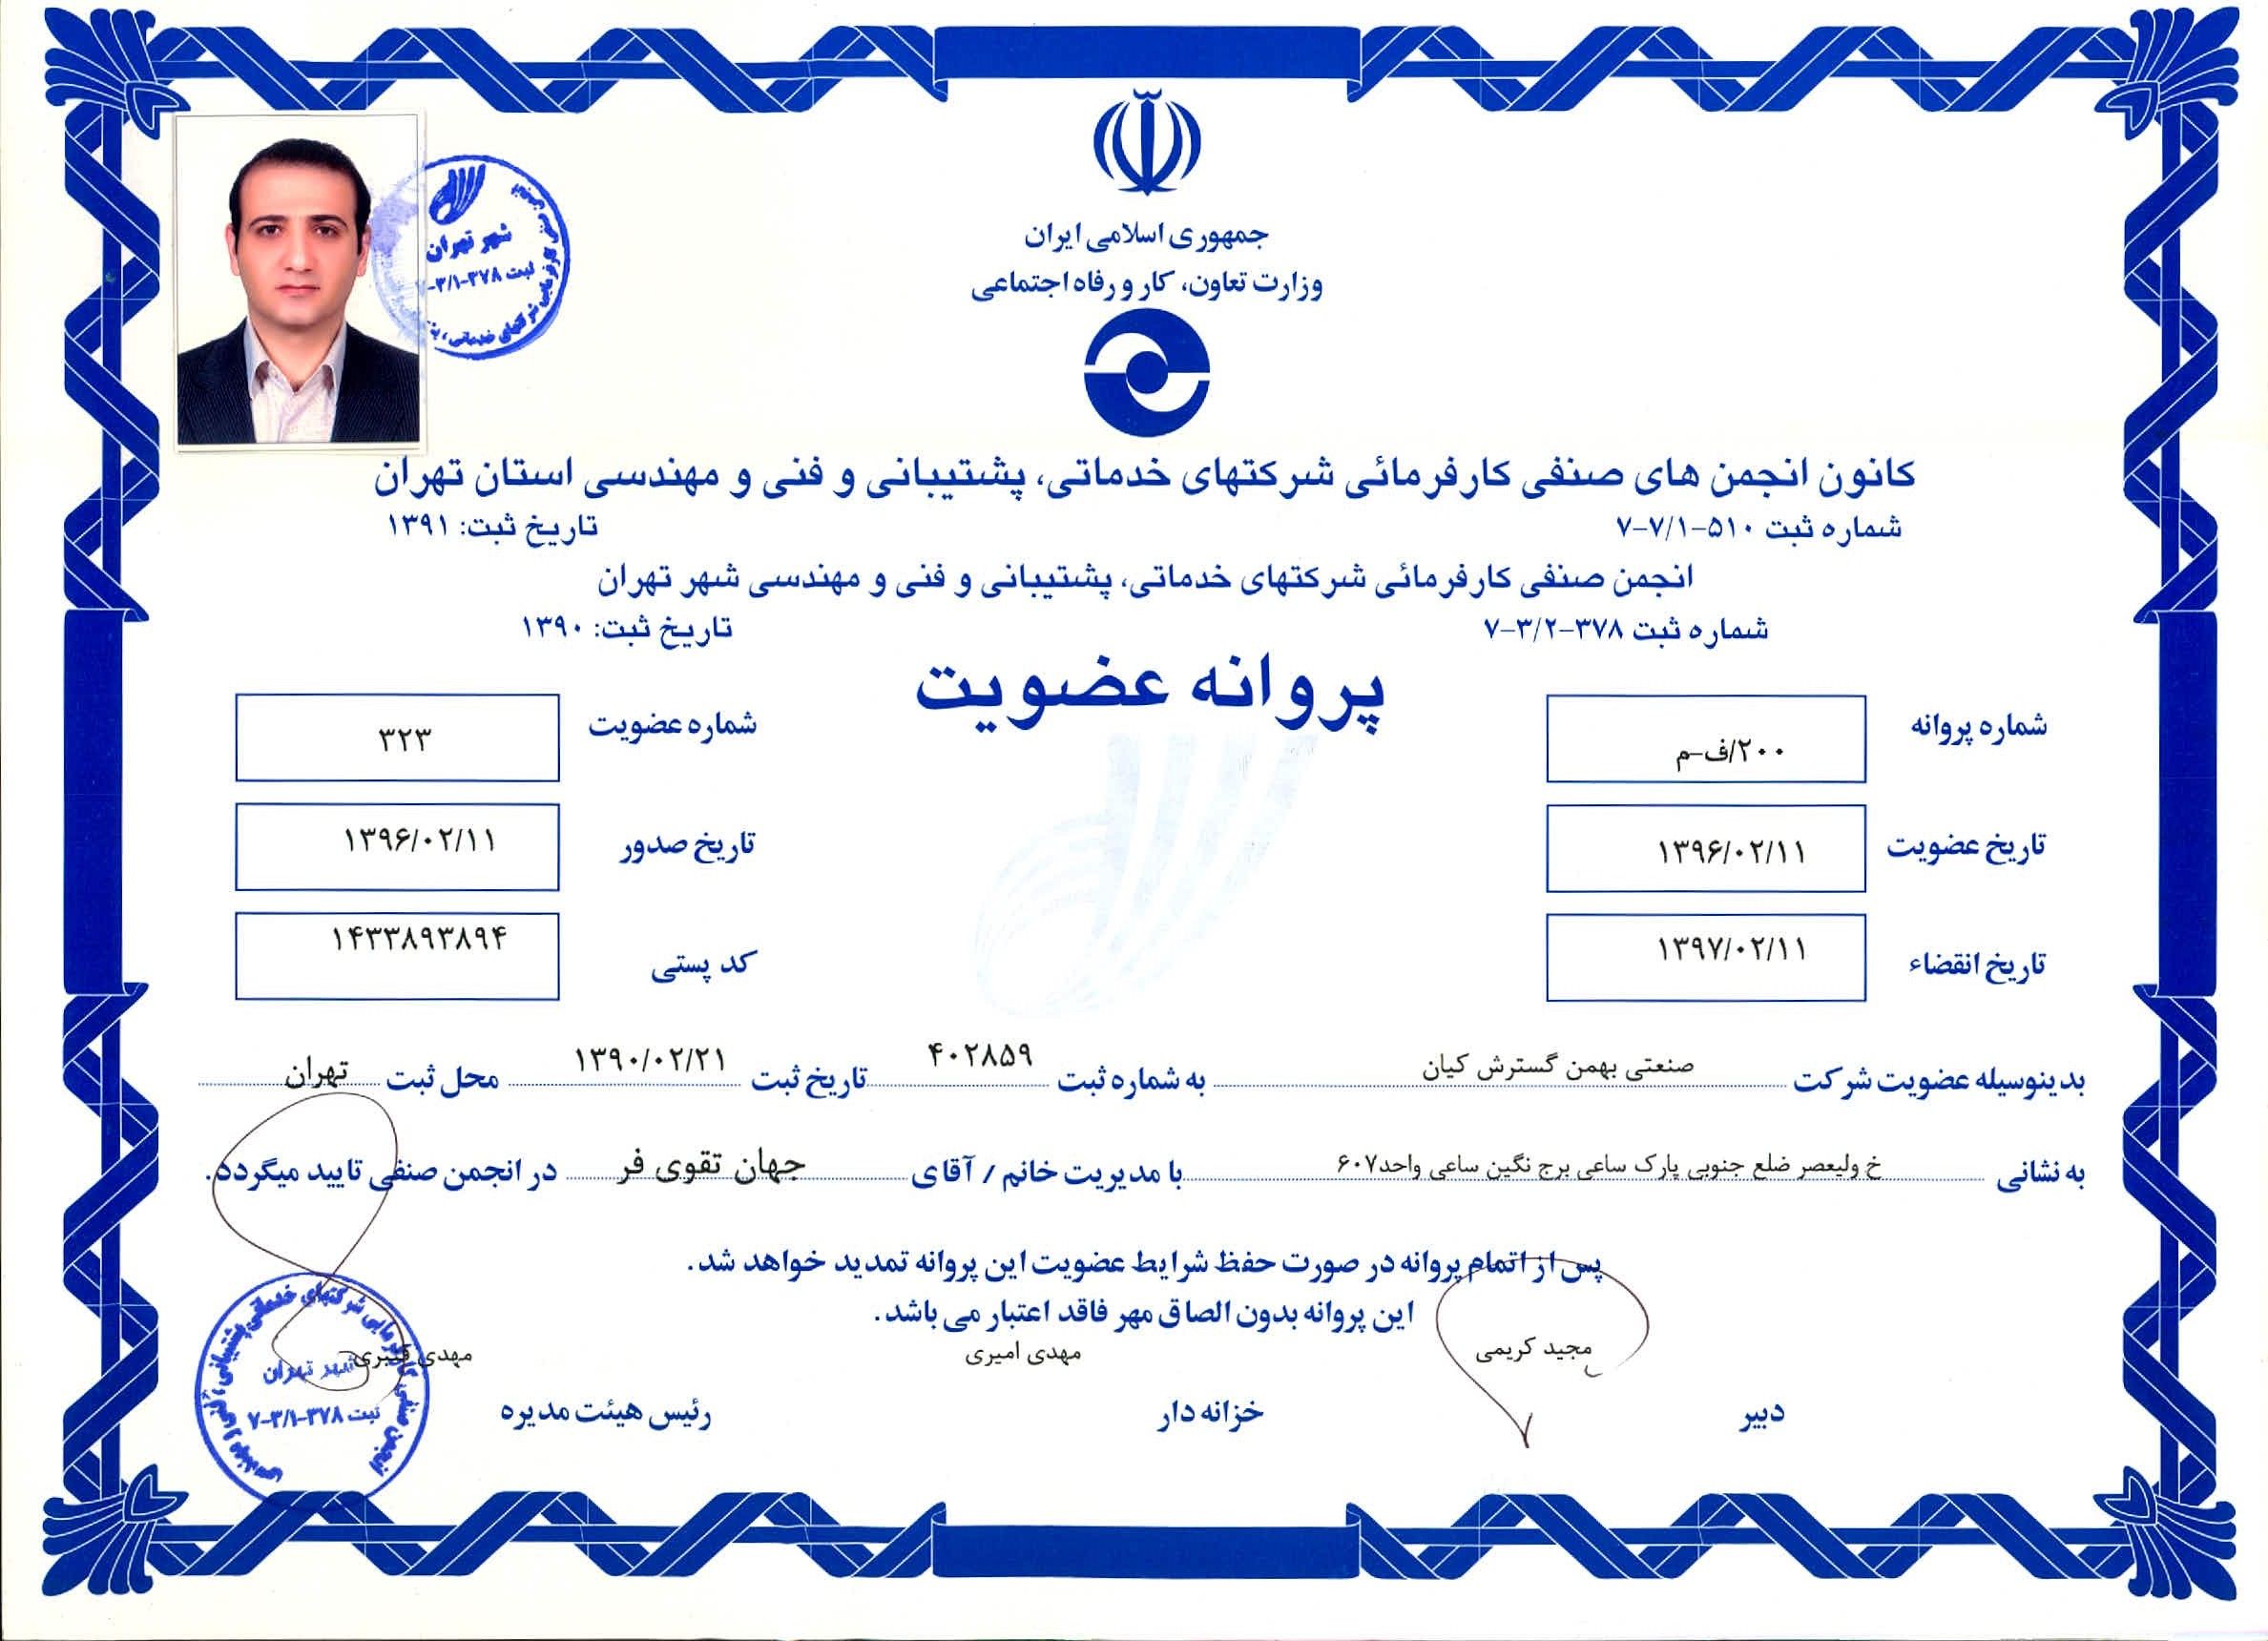 Membership in club of Employers’ Associations of Services, Support, and Technical Services of Tehran Province